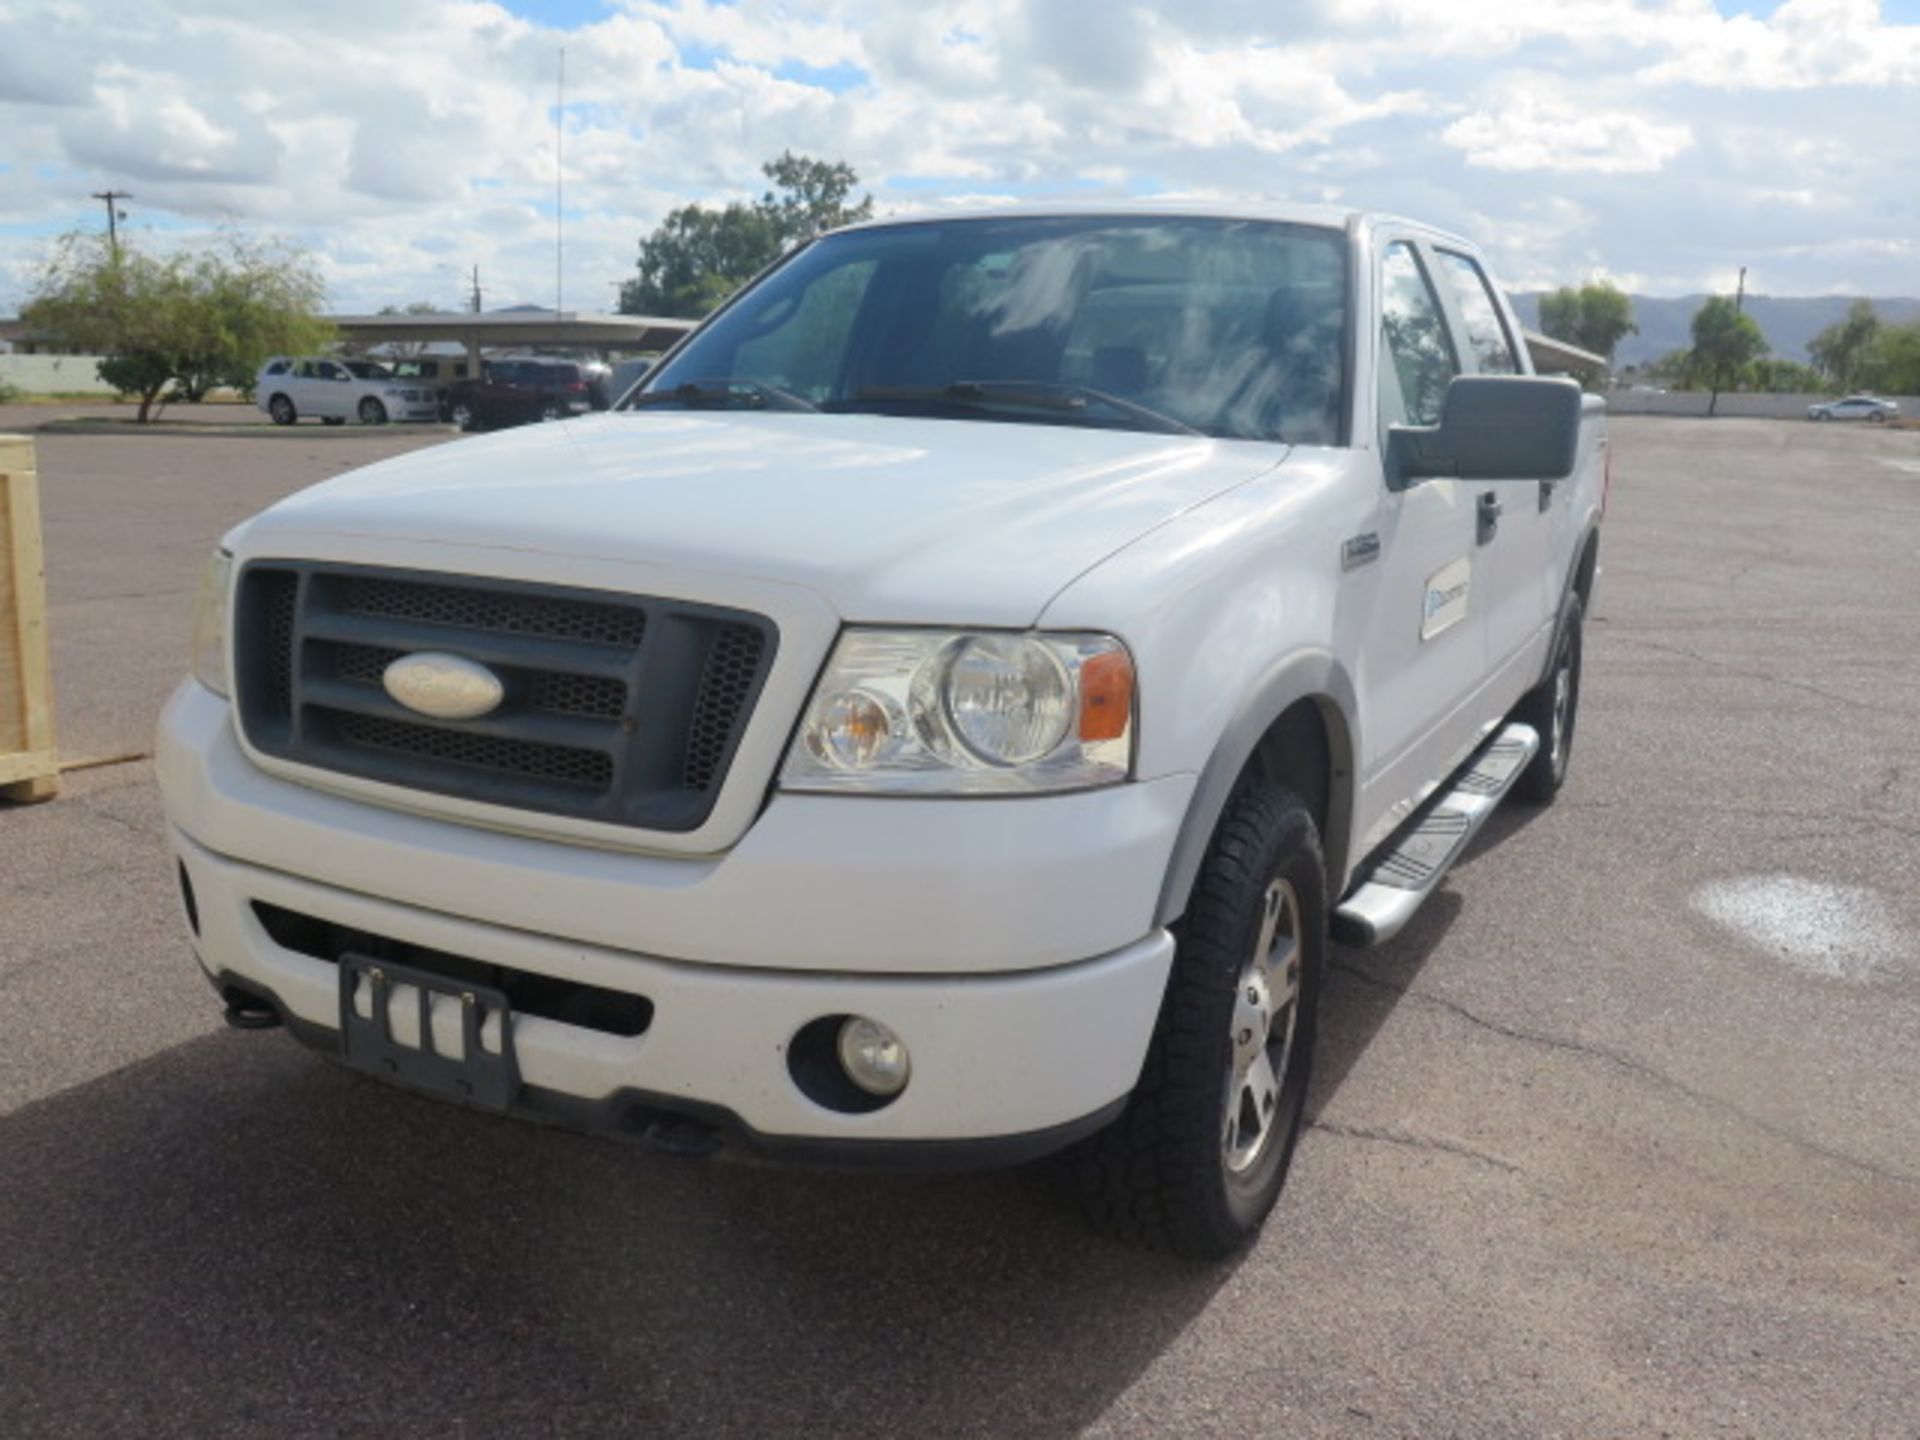 2007 Ford F-150 FX4 Off Road Dual Cab Pickup Truck Lisc CK81171 w/ 5.4L Triton Engine, Automatic - Image 2 of 15